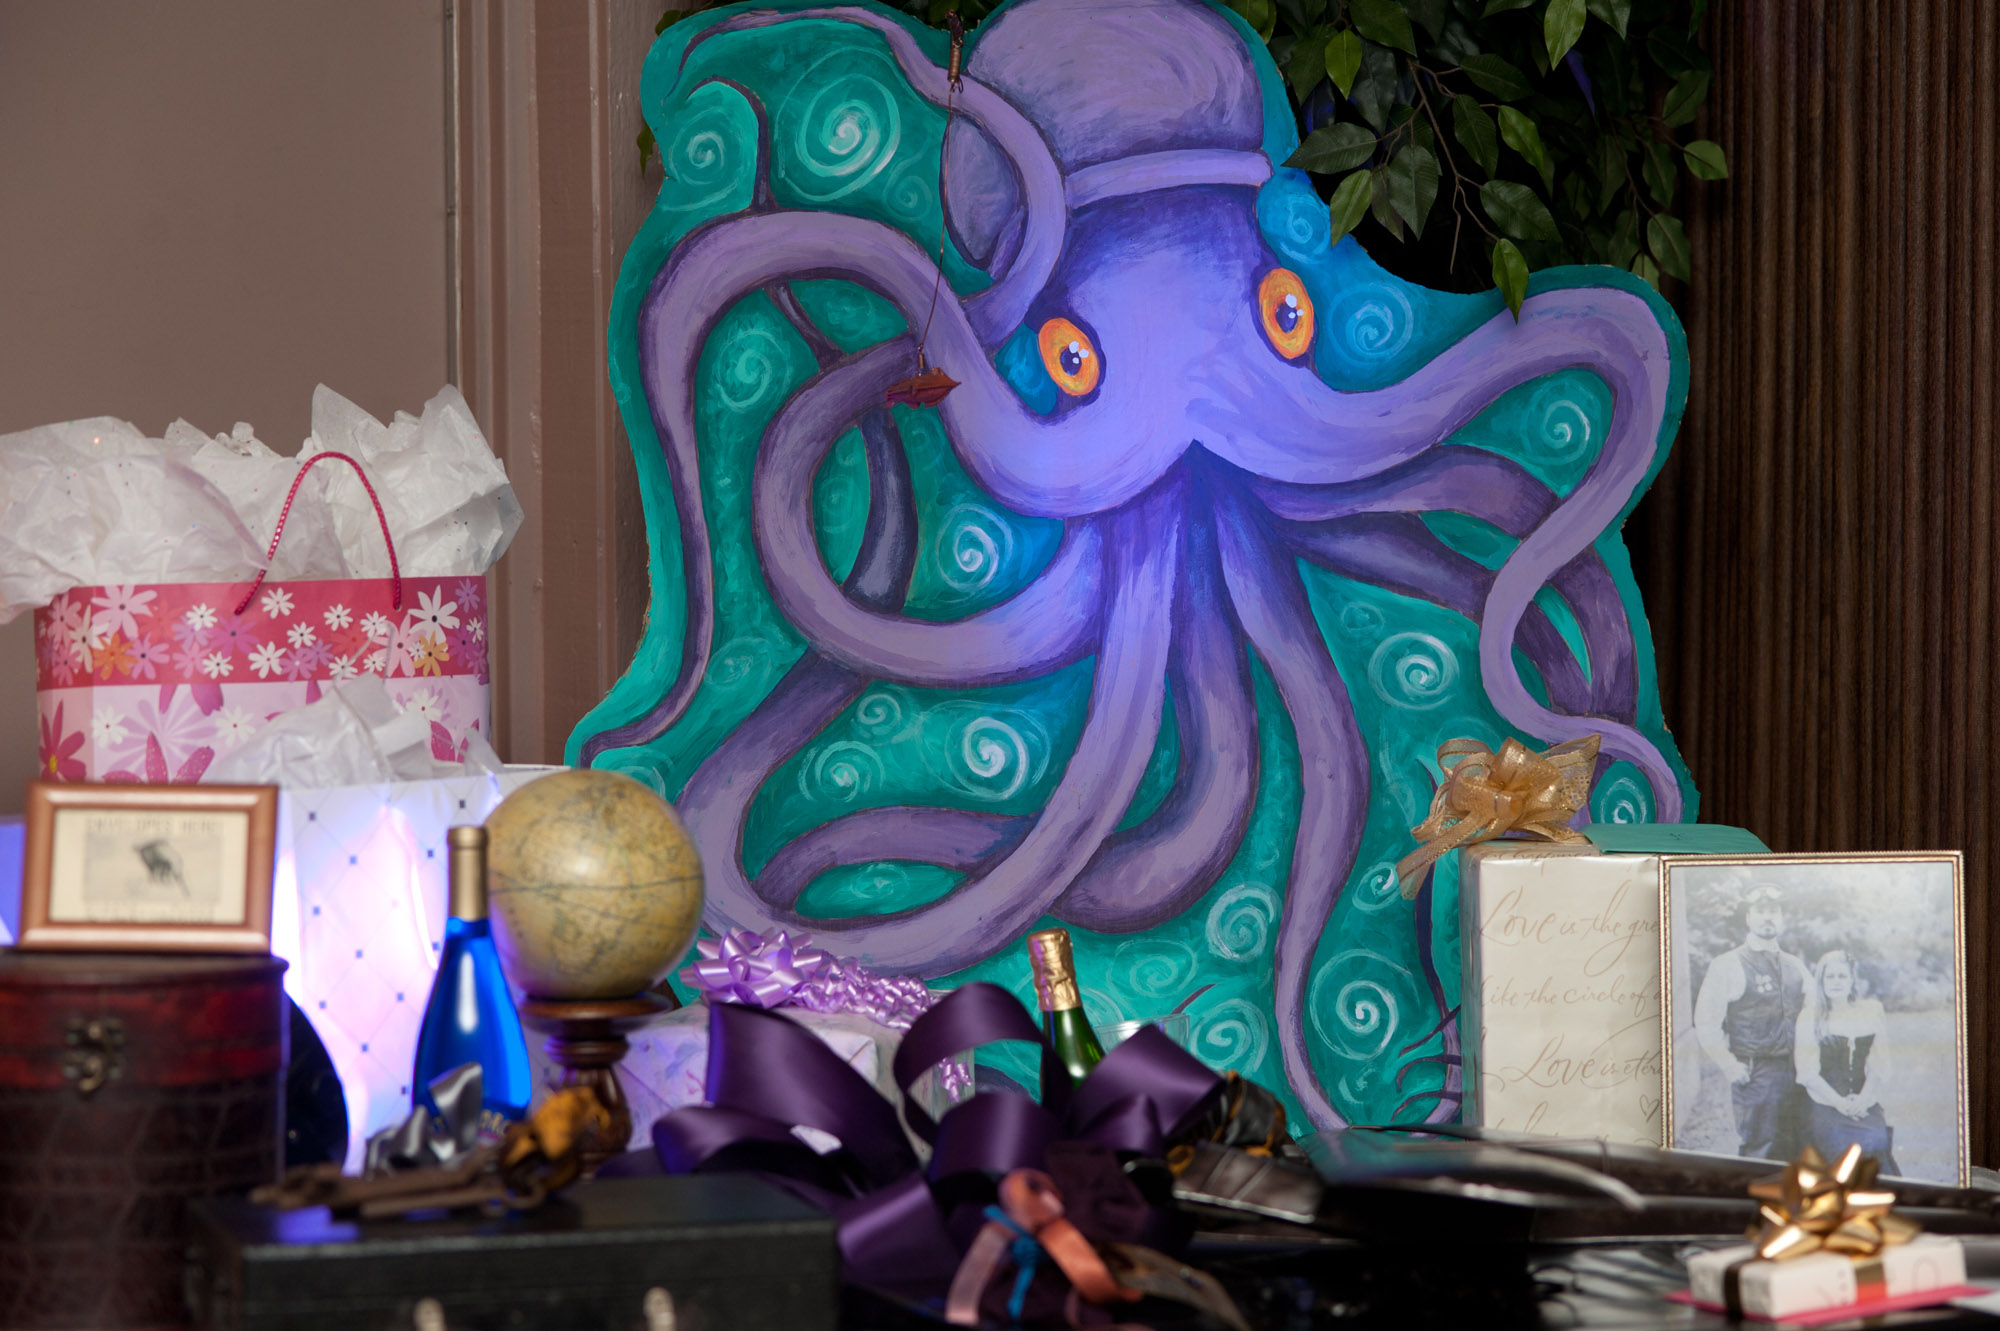 Octopus near the gift table.